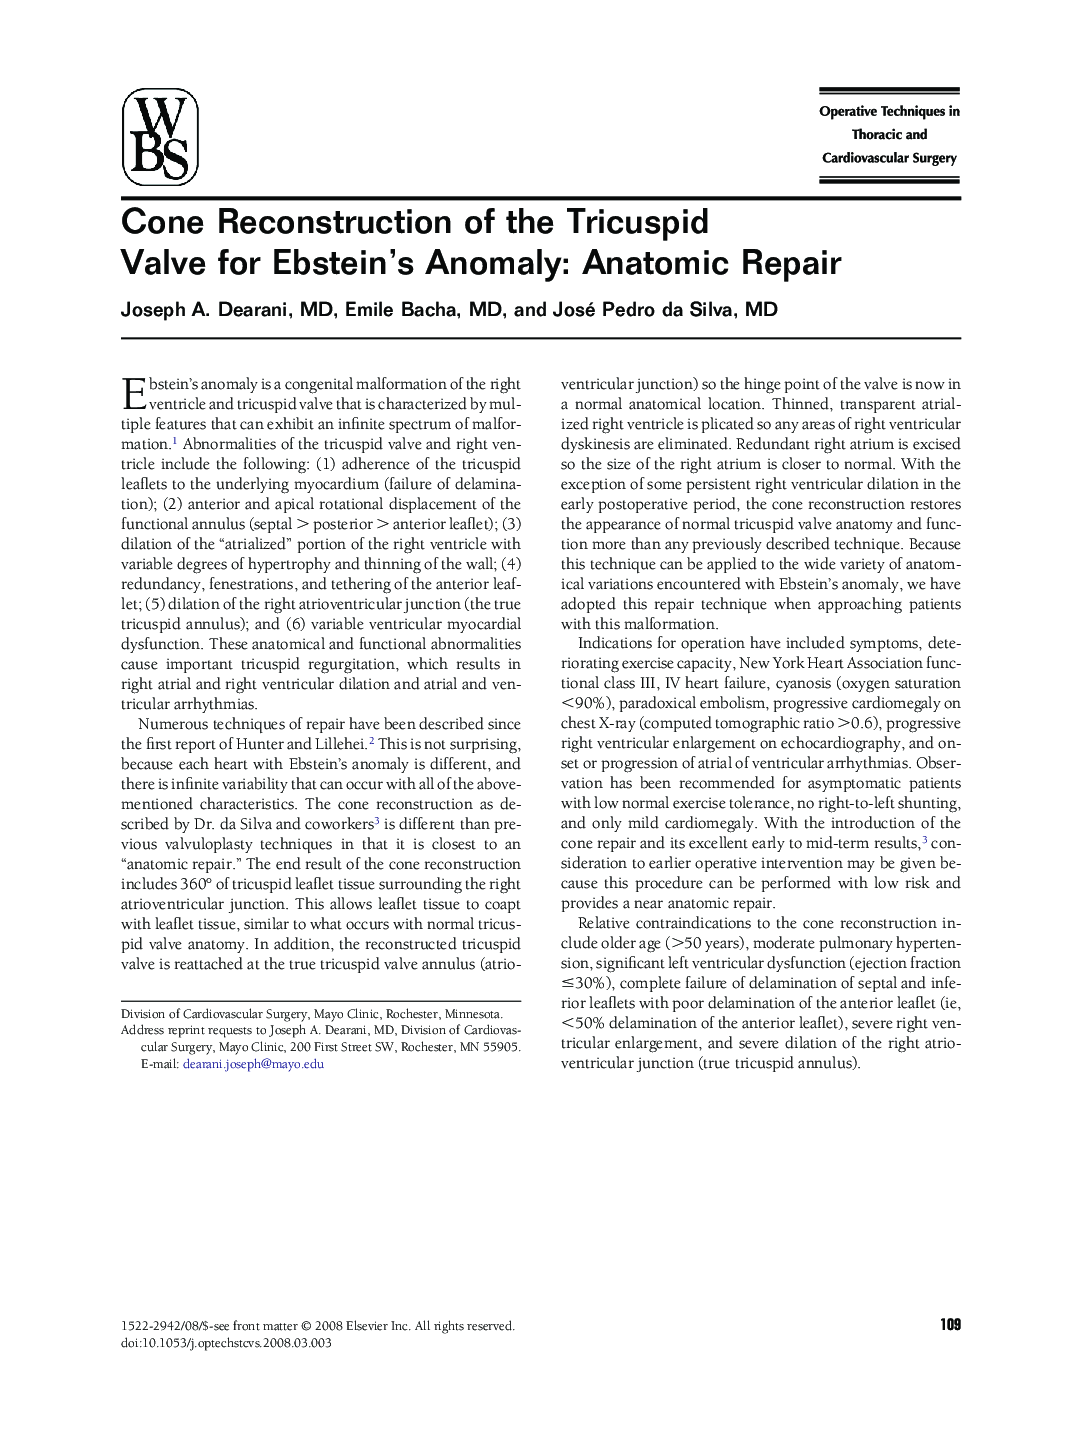 Cone Reconstruction of the Tricuspid Valve for Ebstein's Anomaly: Anatomic Repair